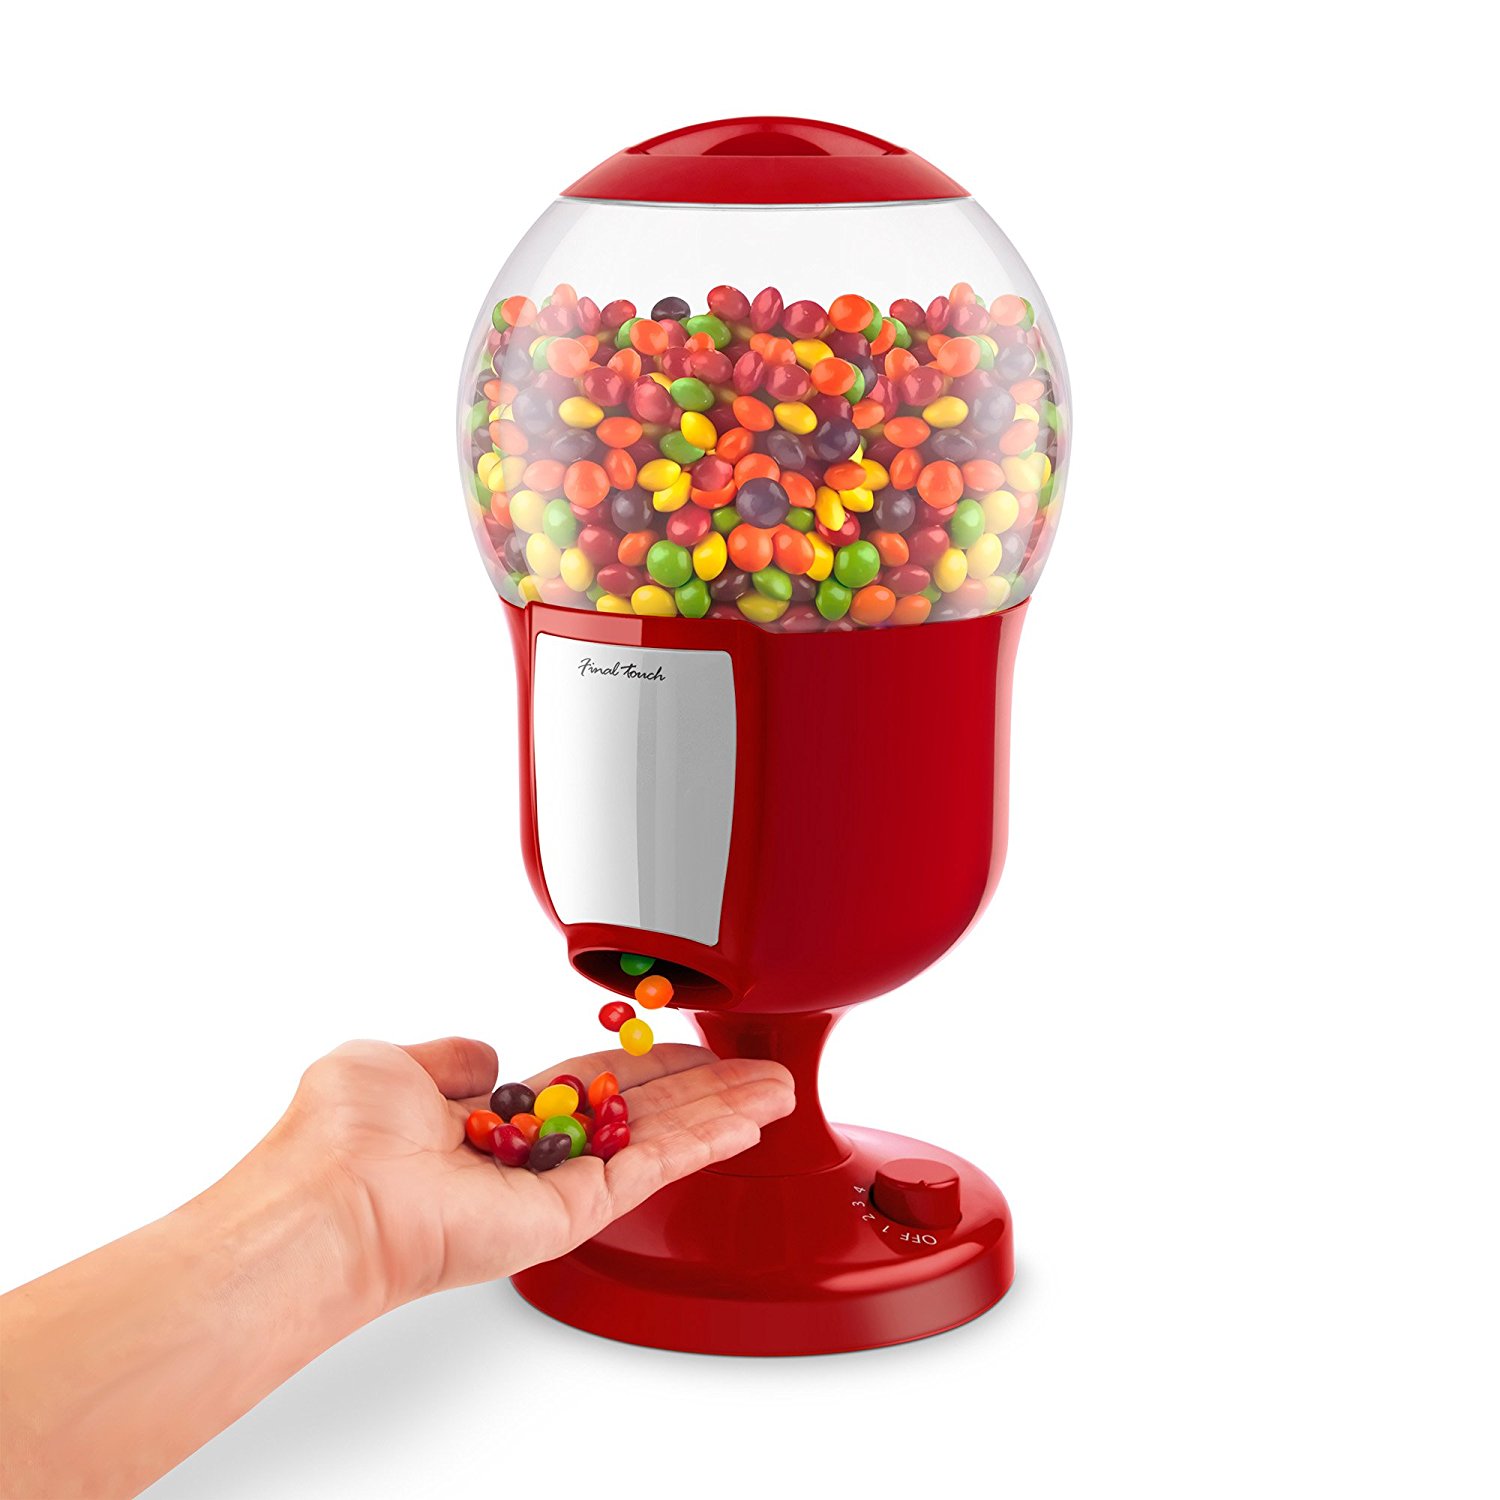 Candy Dispenser Pics, Man Made Collection